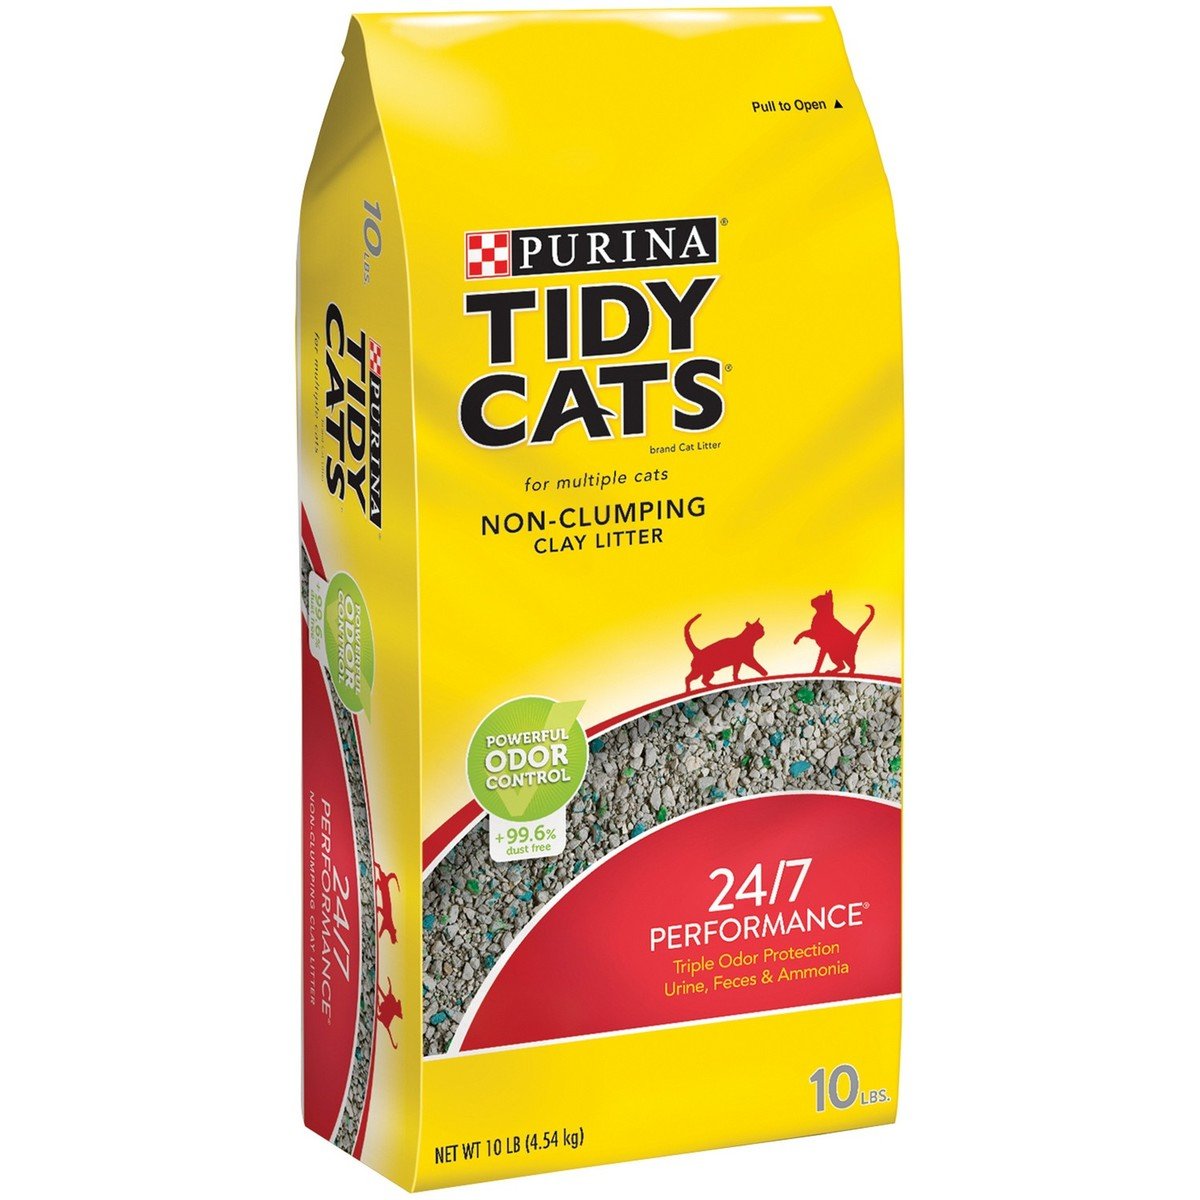 Tidy Cats Clay Litter 4.54kg